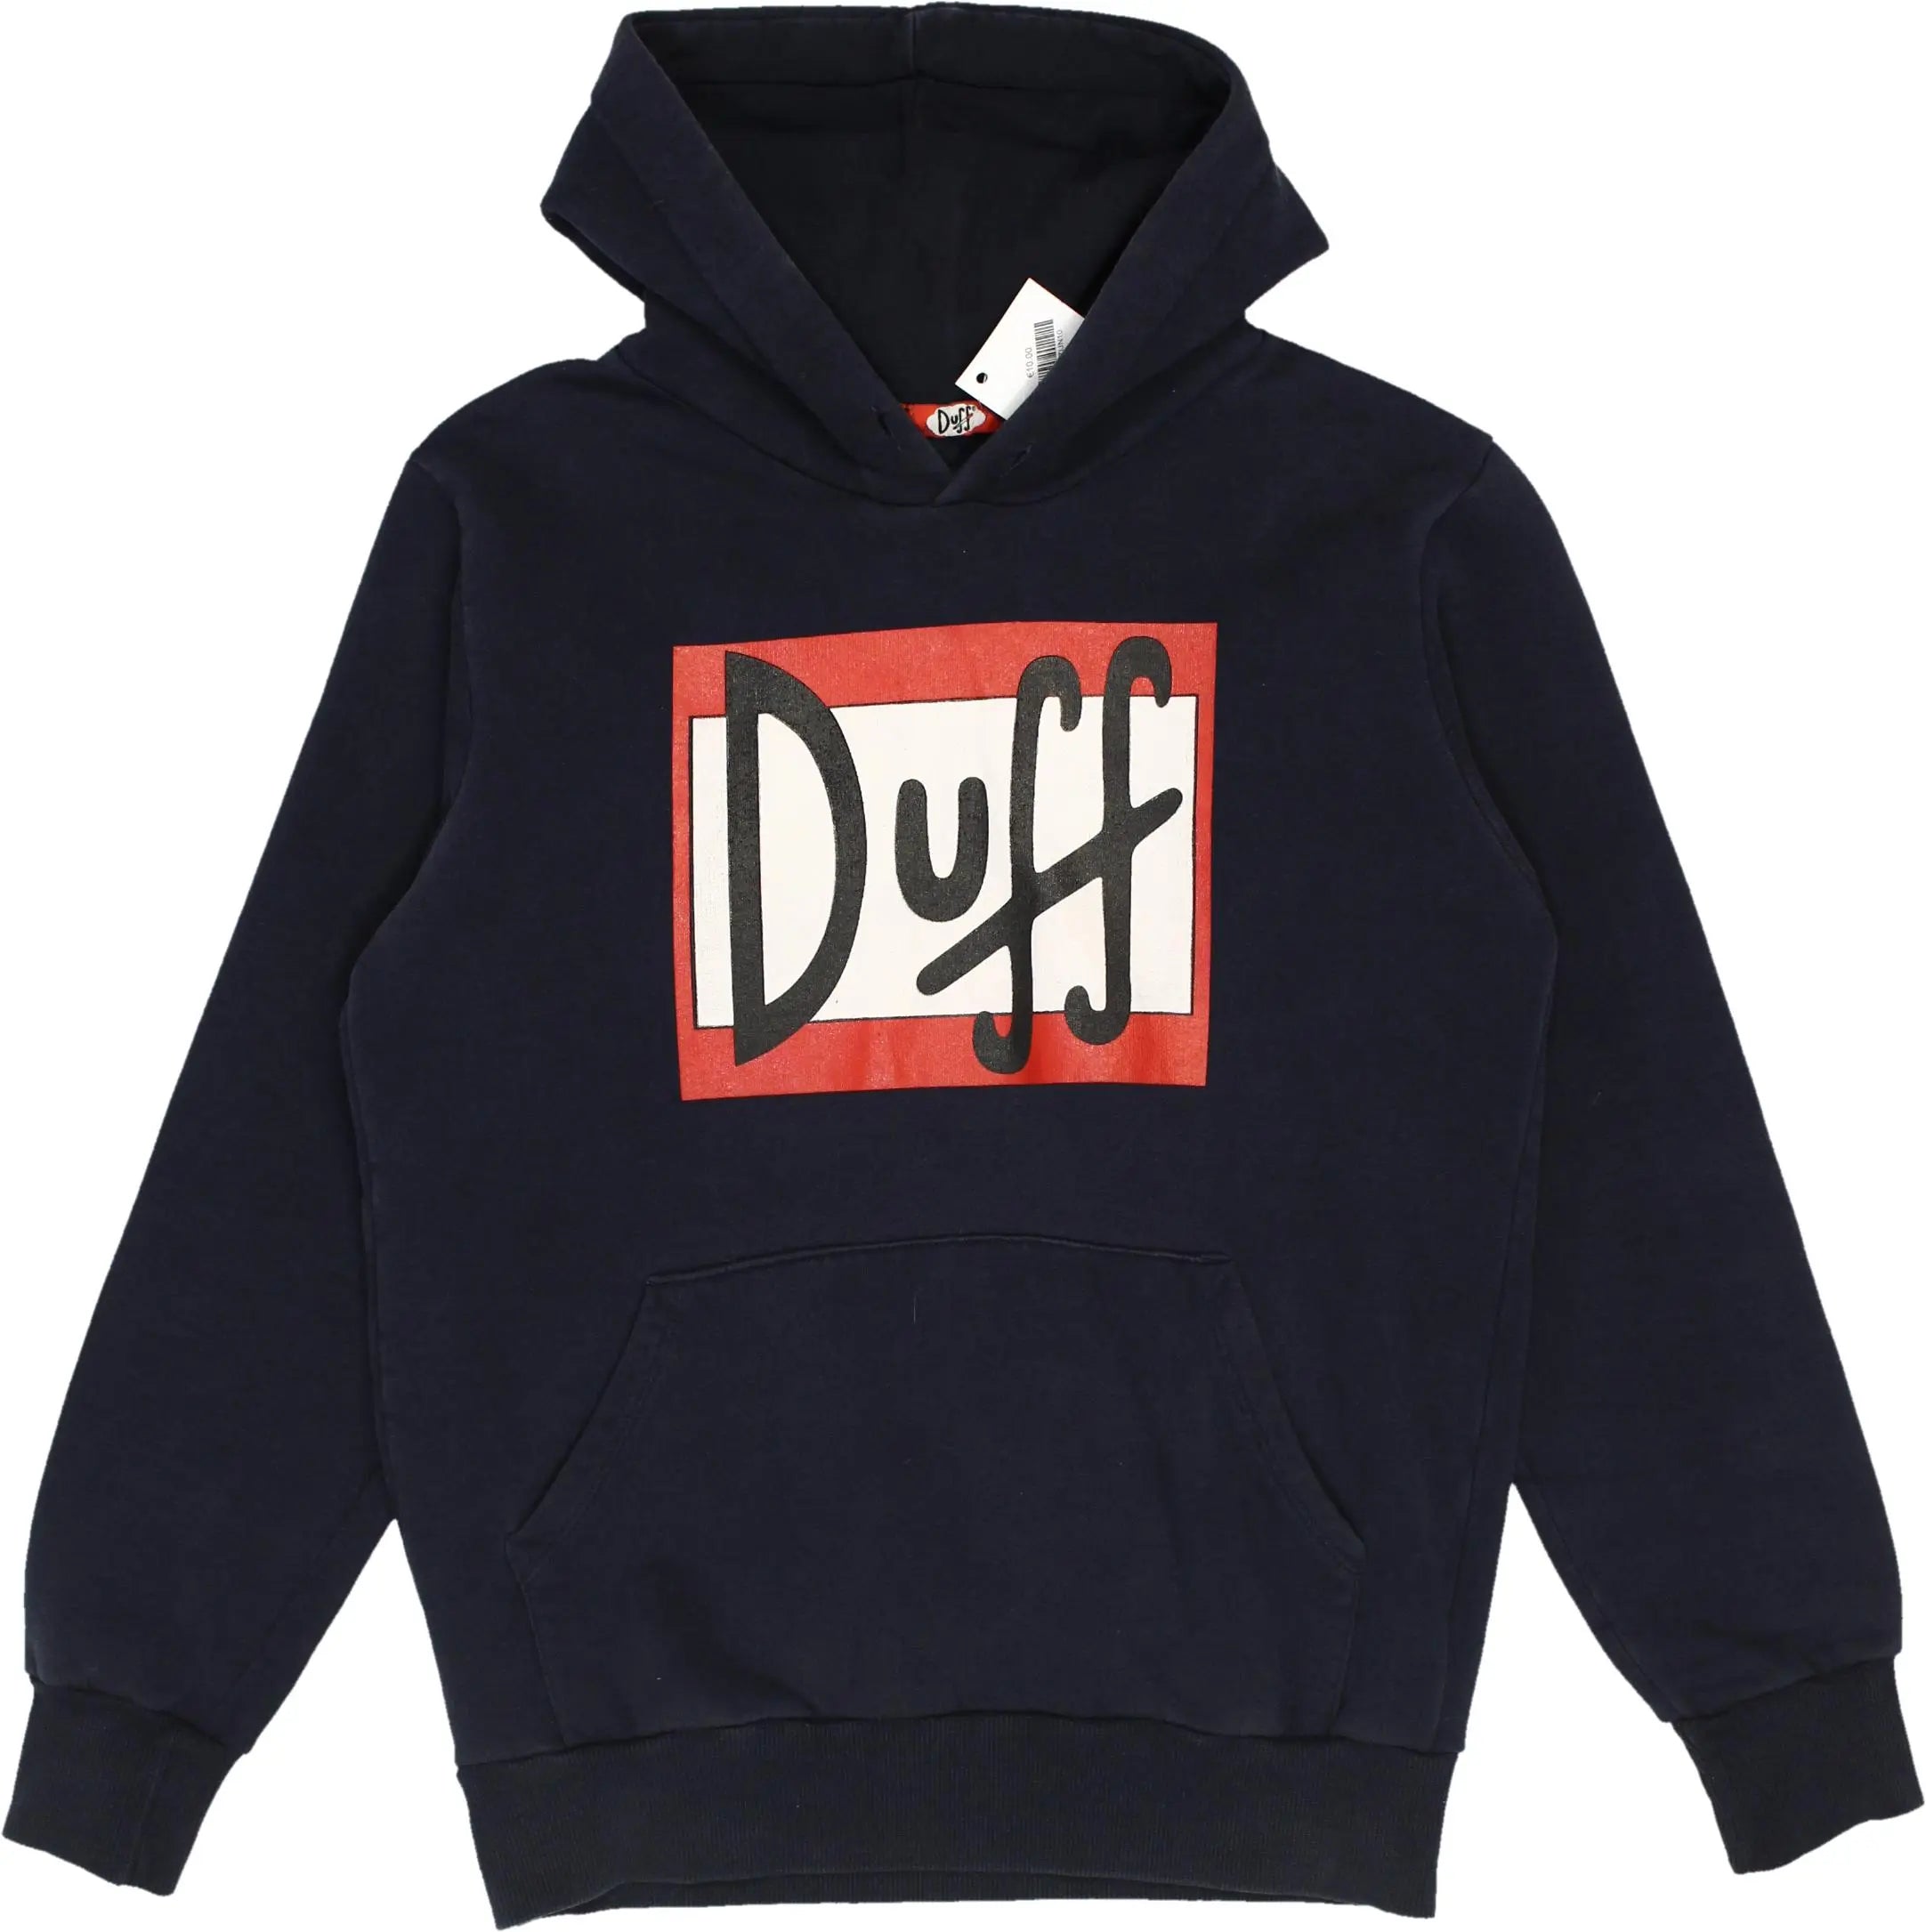 Duff - Blue Hoodie- ThriftTale.com - Vintage and second handclothing